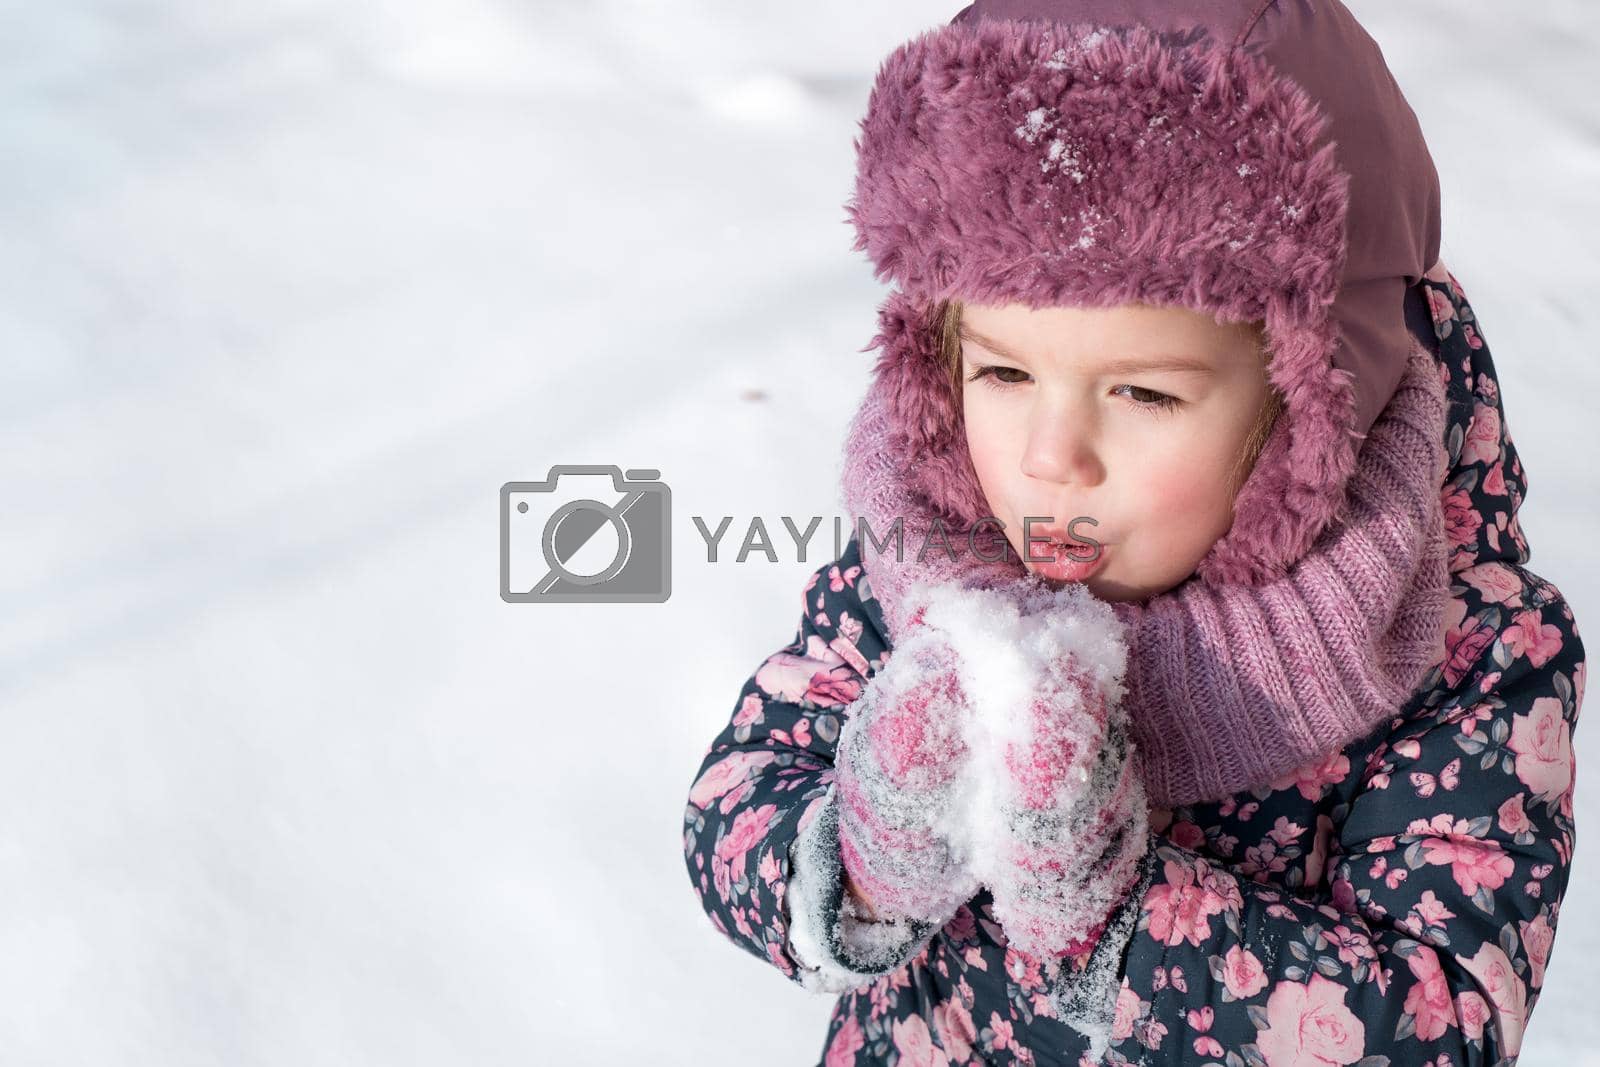 Royalty free image of Winter, games, family, childhood concepts - close-up portrait authentic little preschool minor 3-4 years girl in pink hat warm clothes have fun smiles in snowy frosty weather. Funny kid eat taste snow by mytrykau